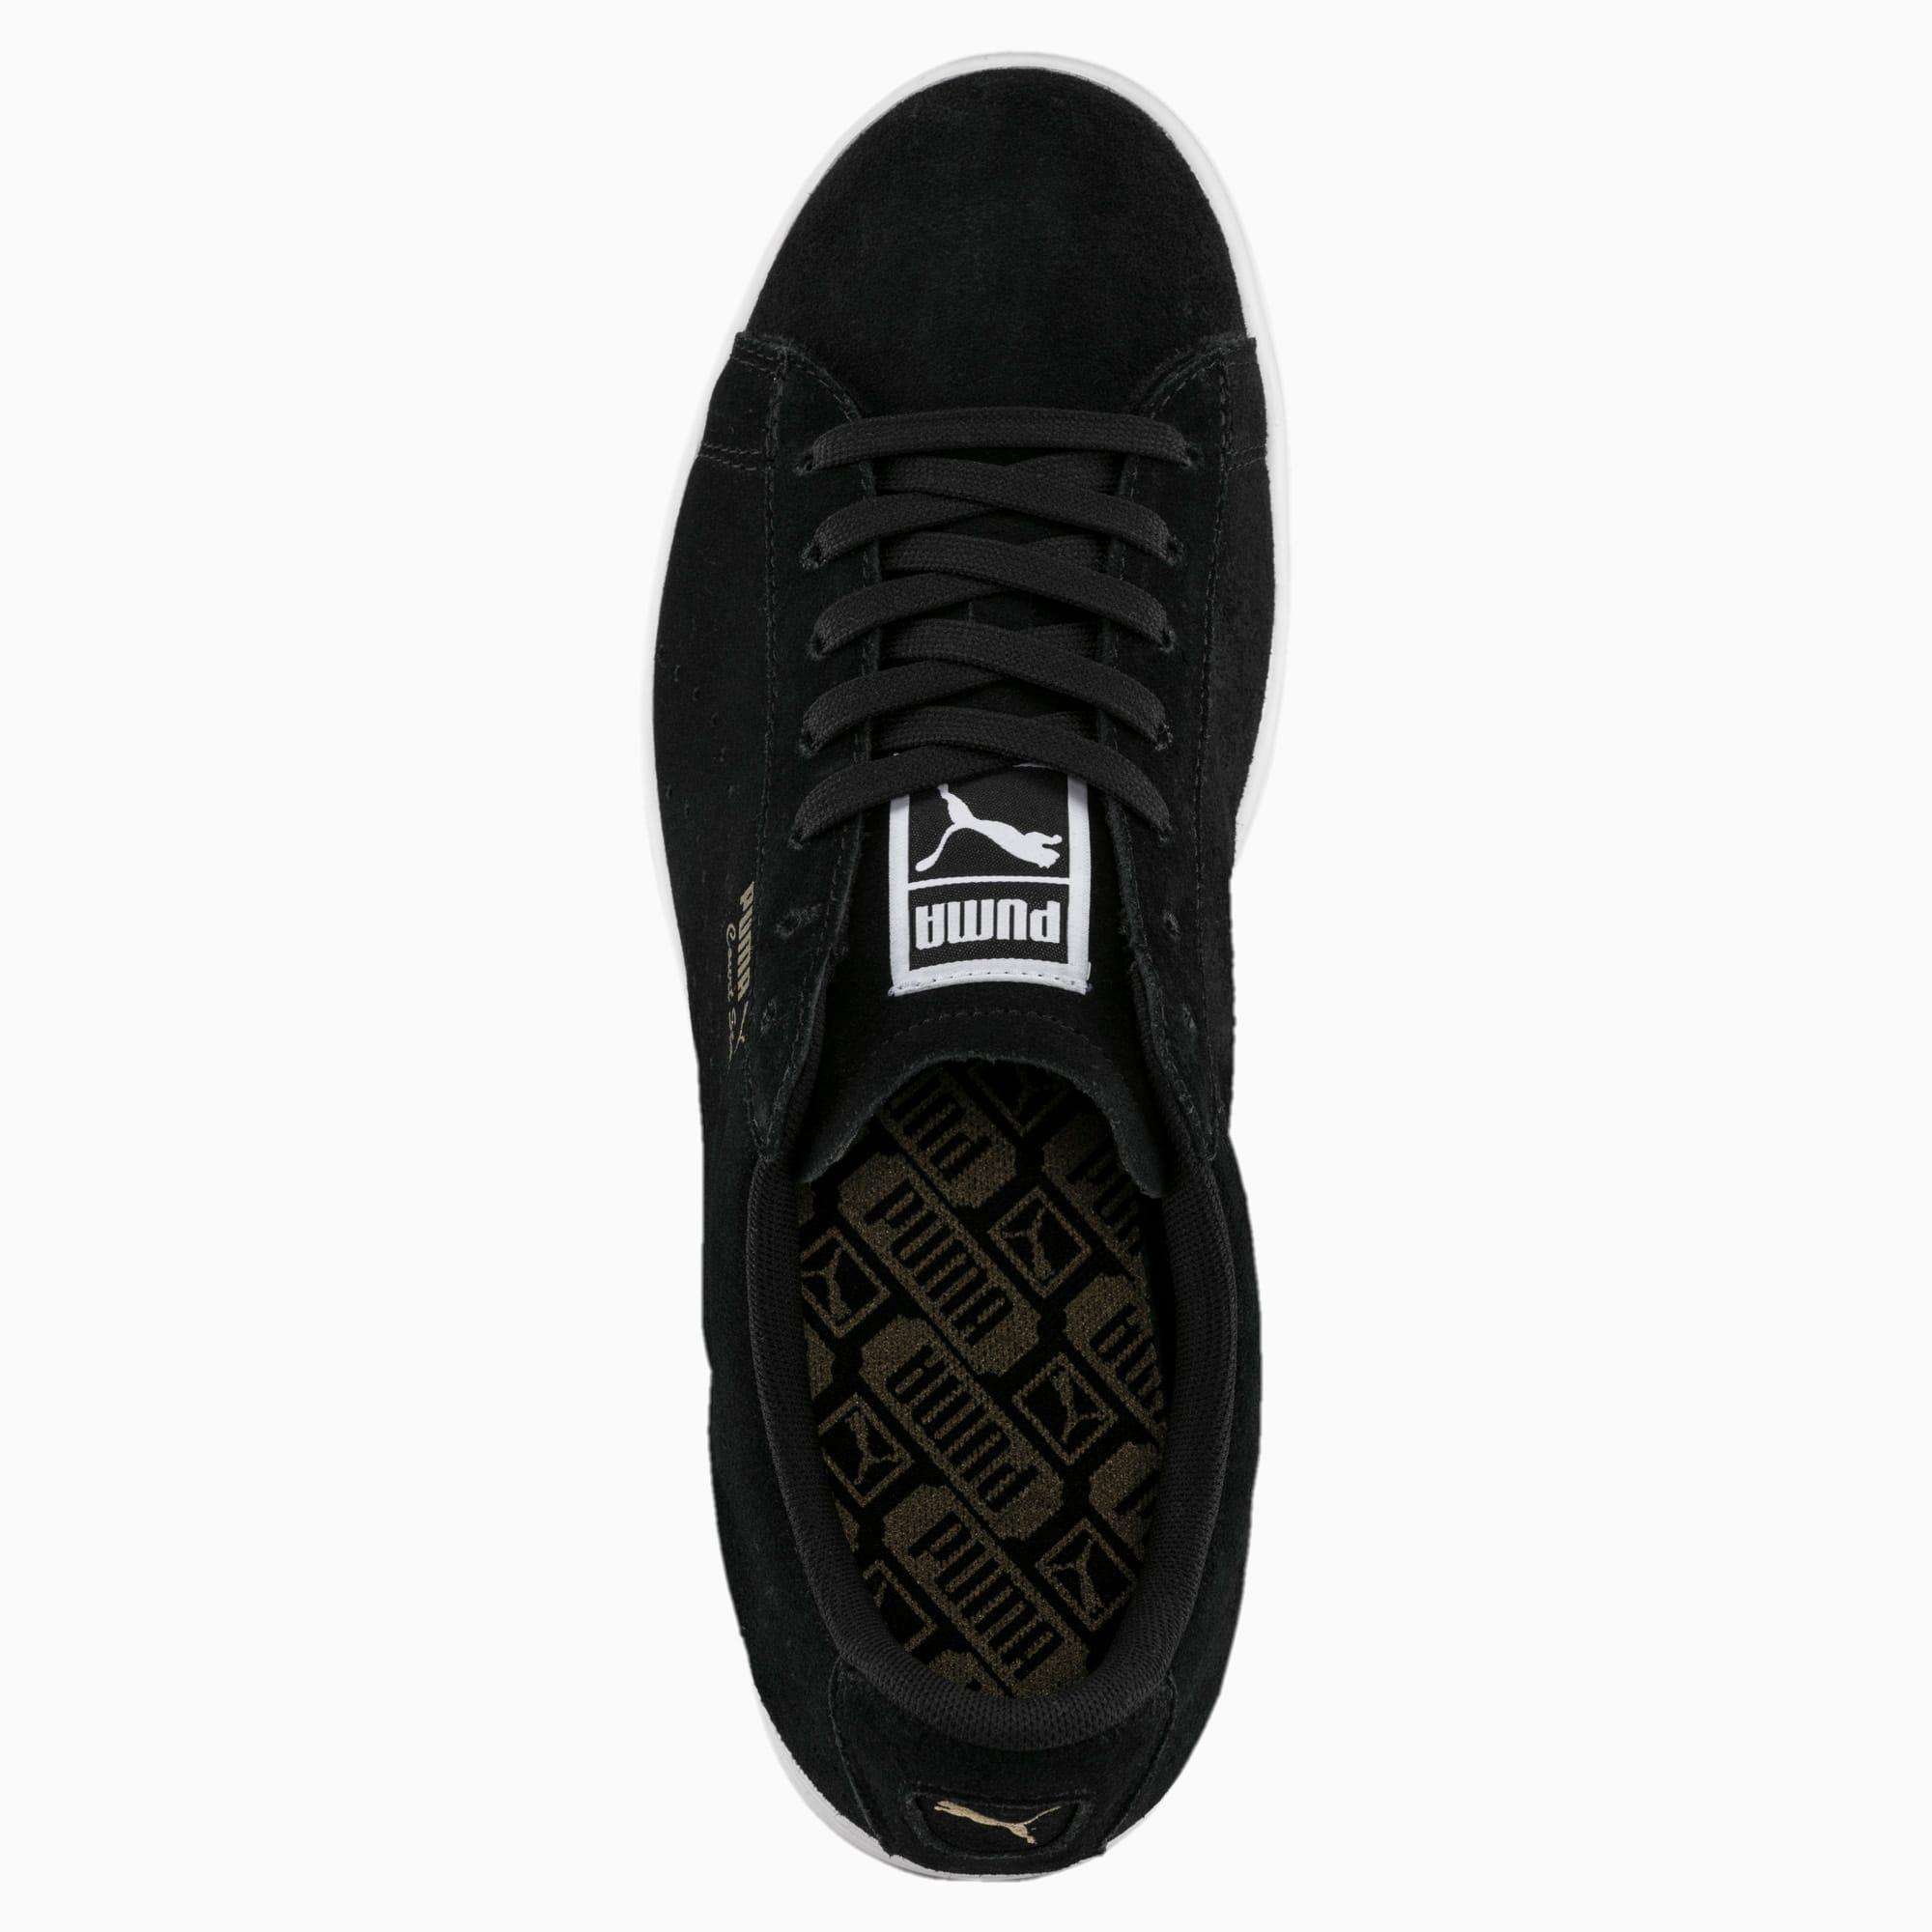 PUMA Court Star Suede Sneakers in 01 (Black) for Men - Save 58% - Lyst